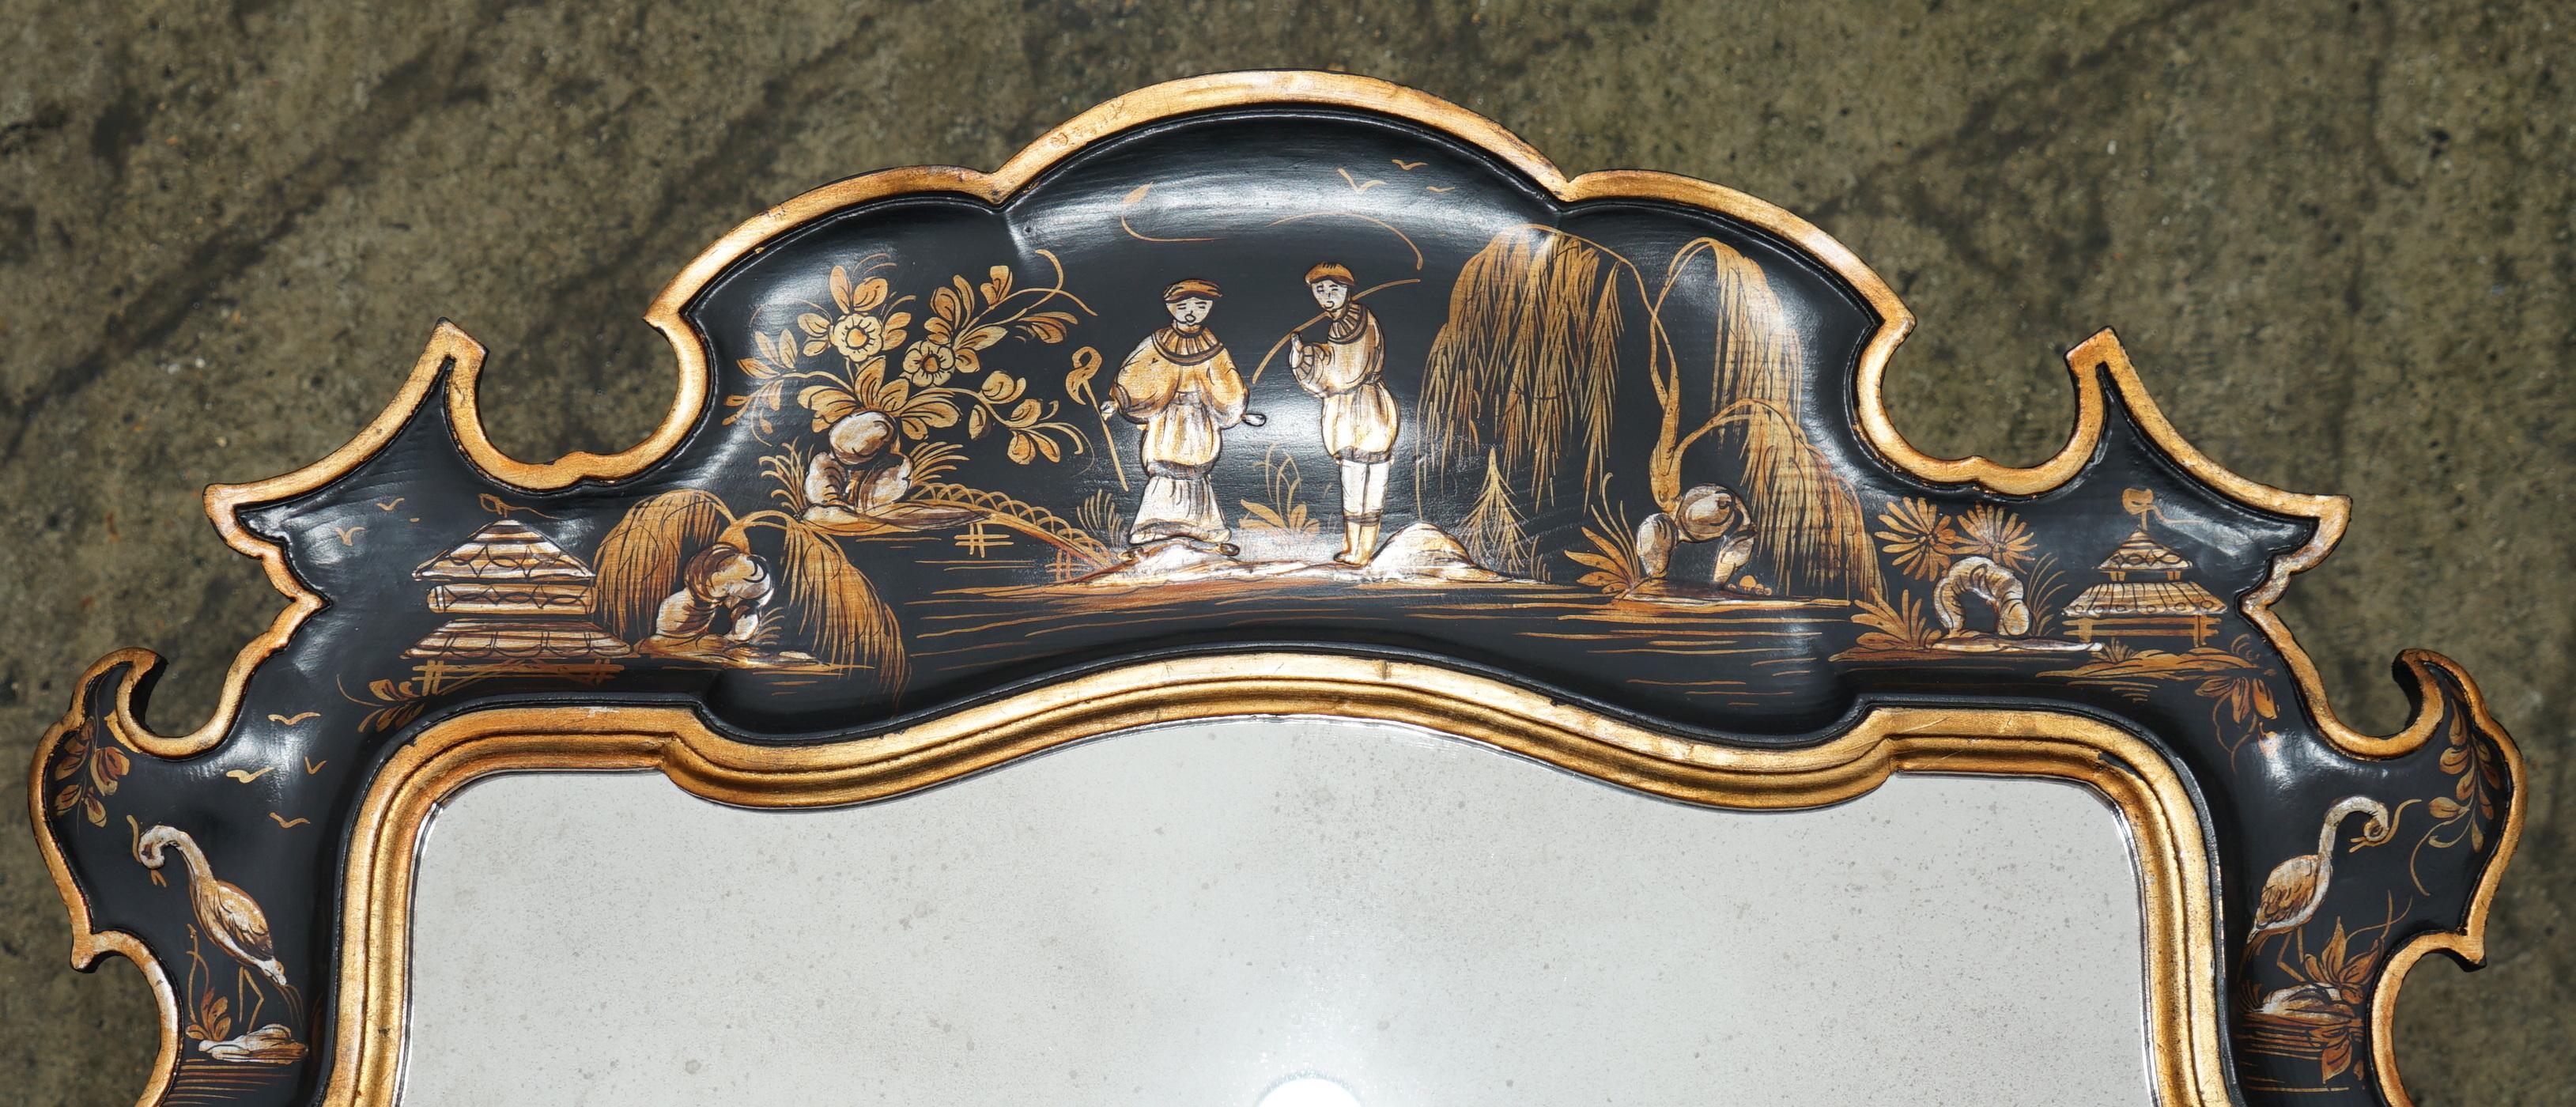 1.4 METER CHINESE CHINOISERIE MiRROR ORNATE HAND PAINTINGS STAMPED MADE IN ITALY For Sale 3